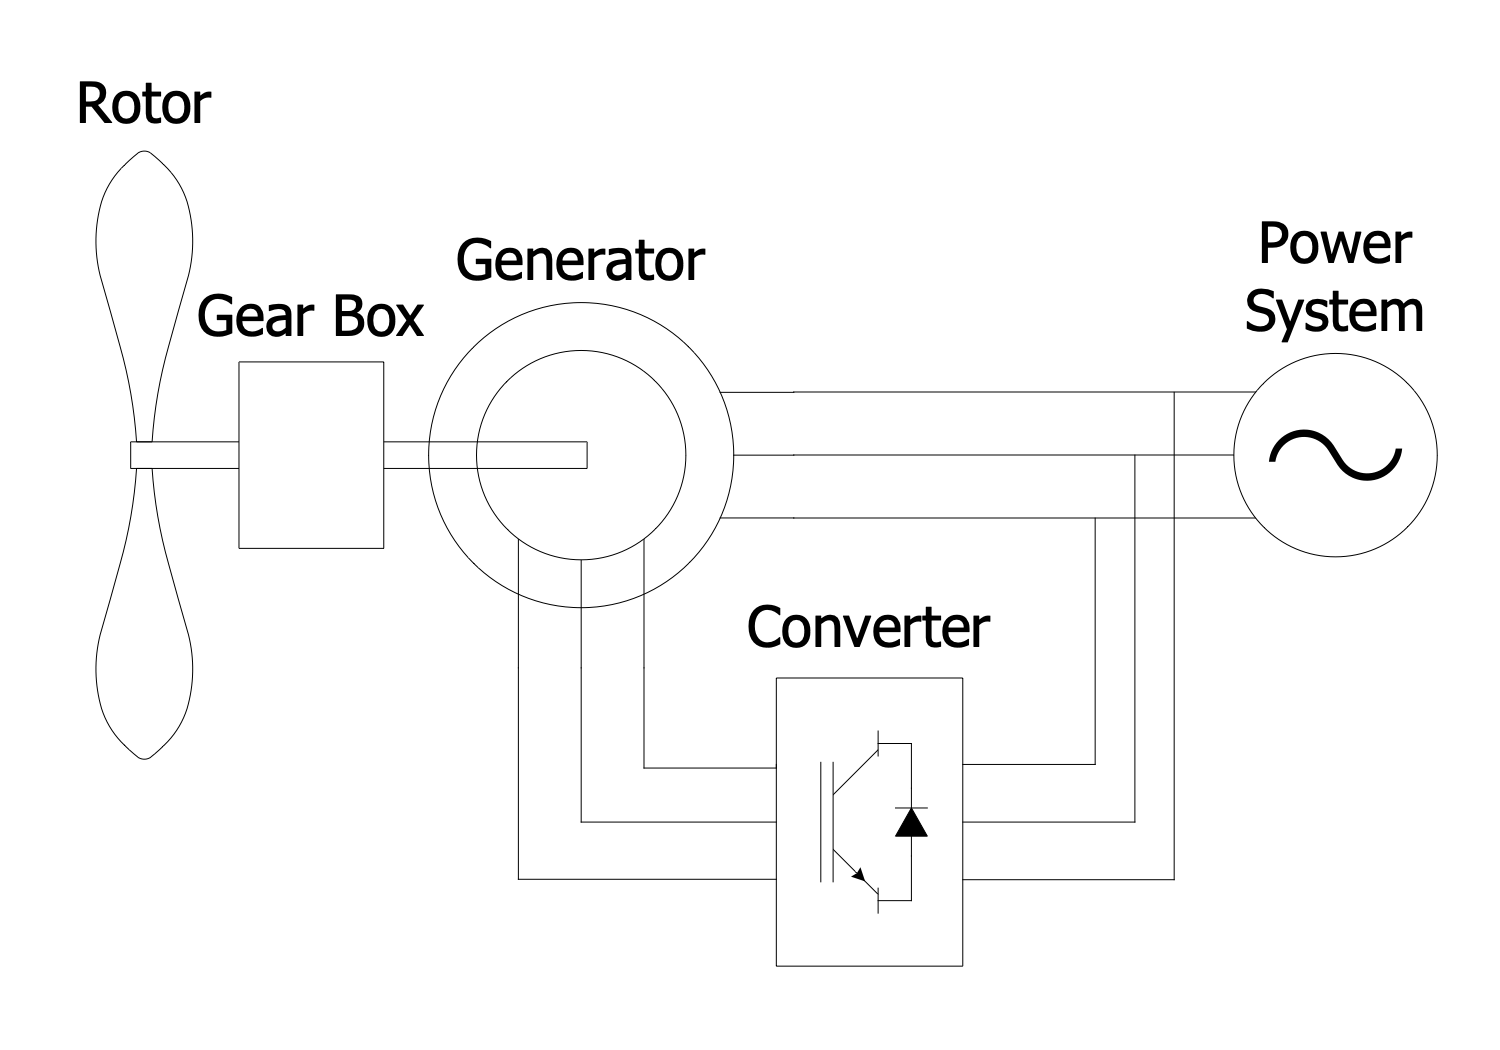 Double Fed Induction Generator Connected to a Wind Turbine